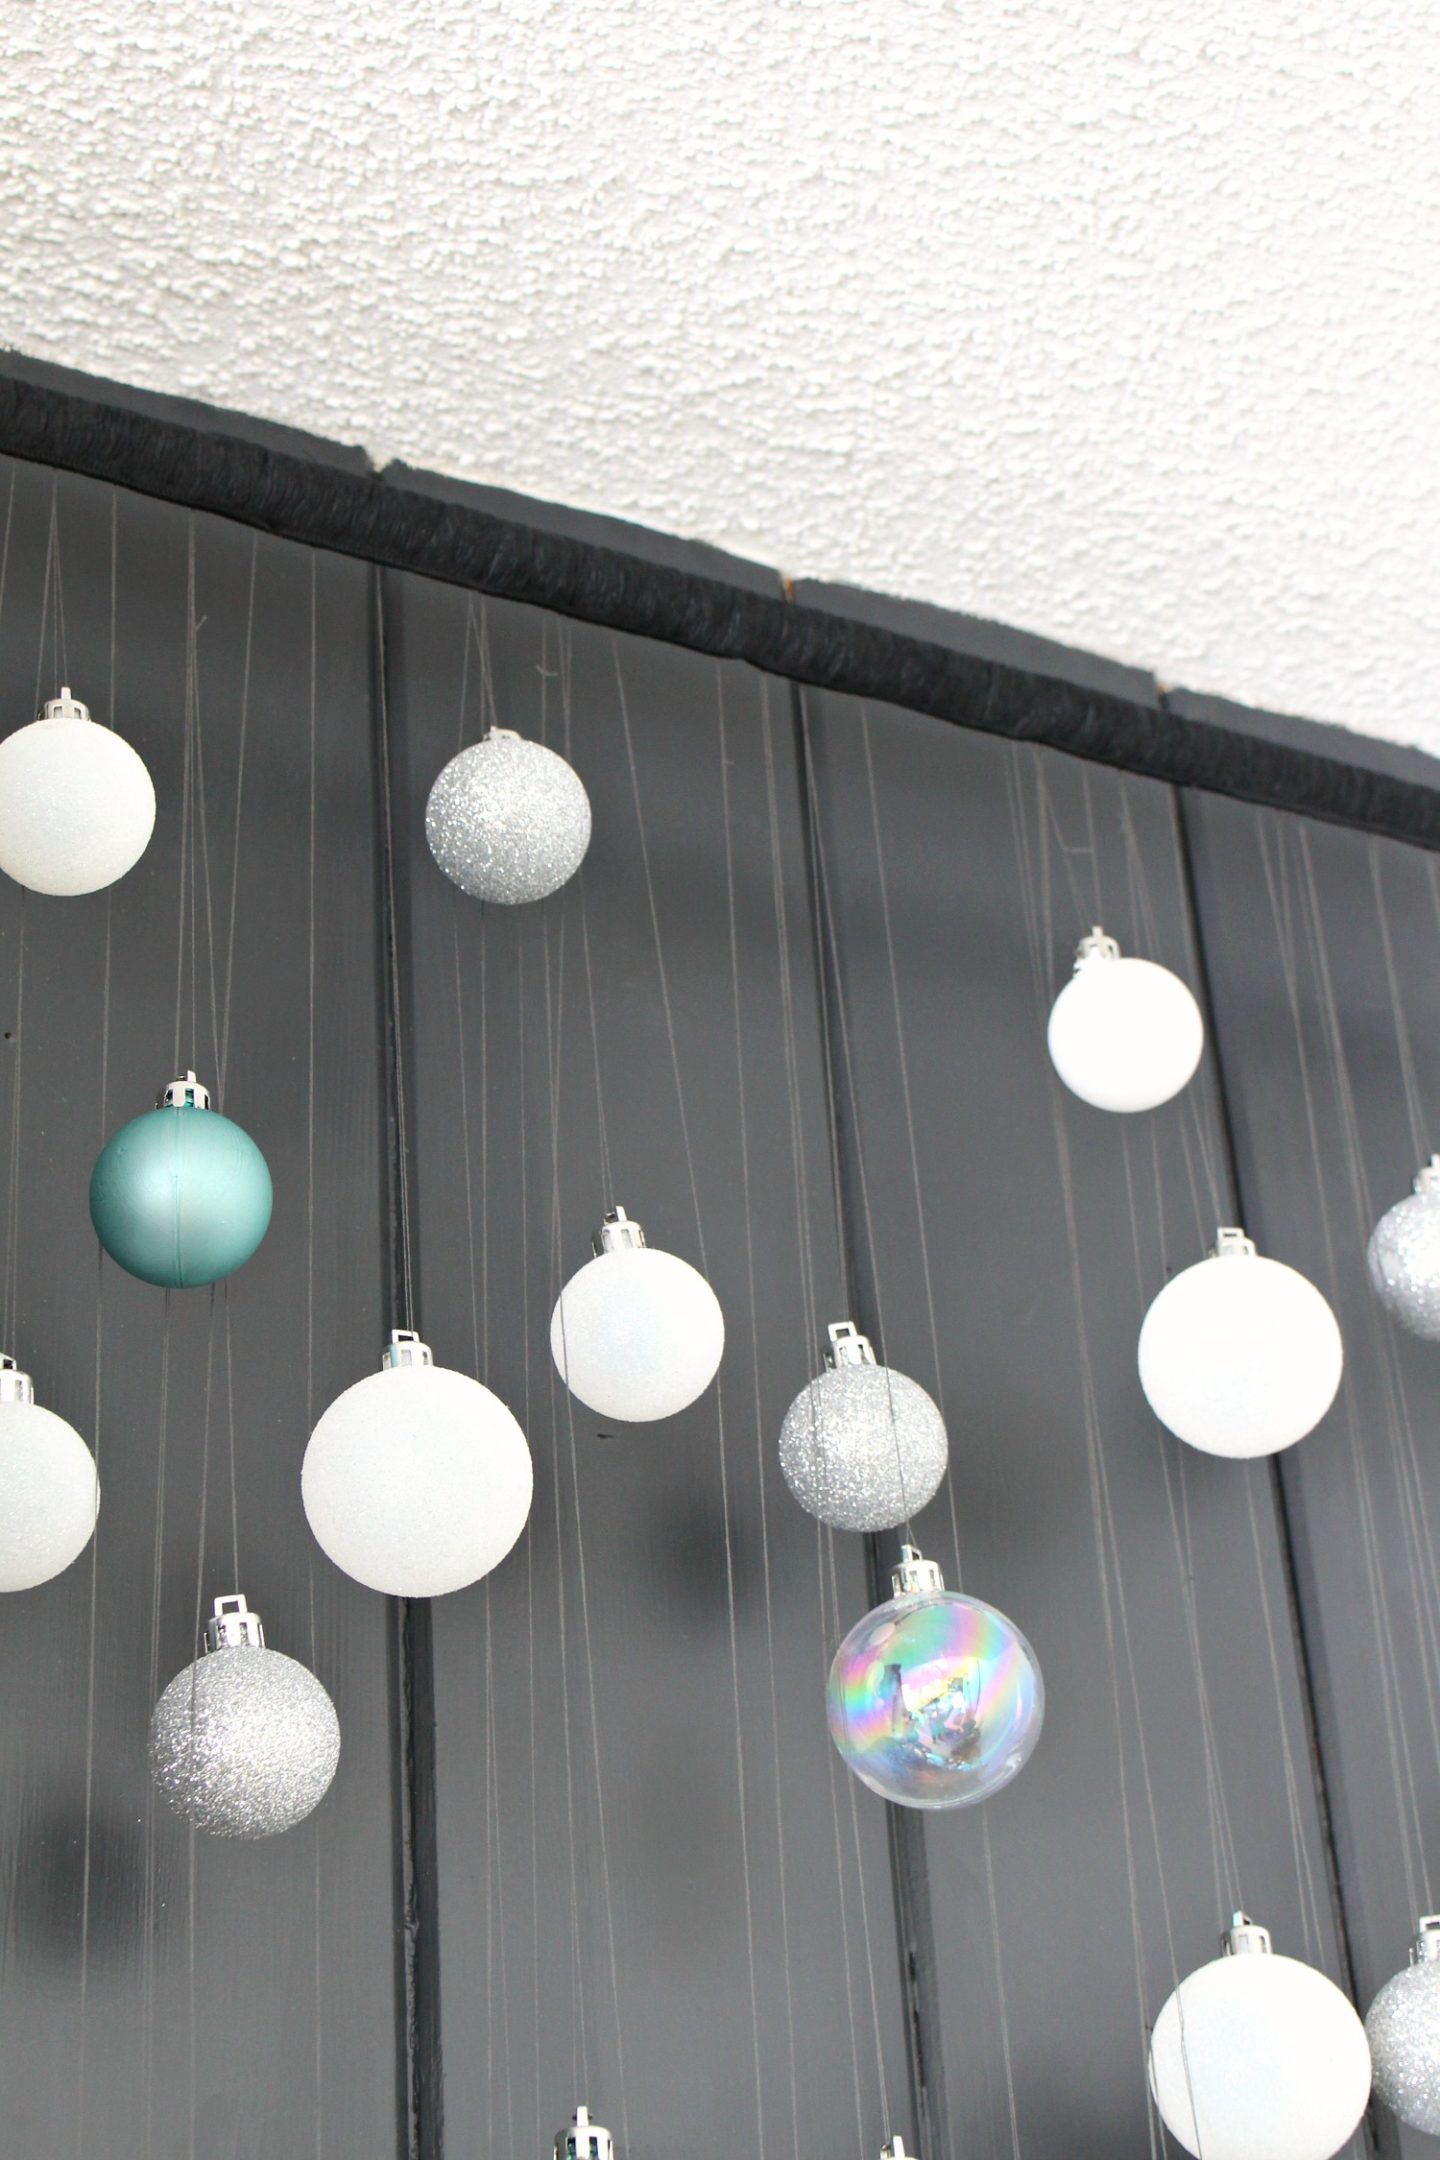 Hang Ornaments from Curtain Rod